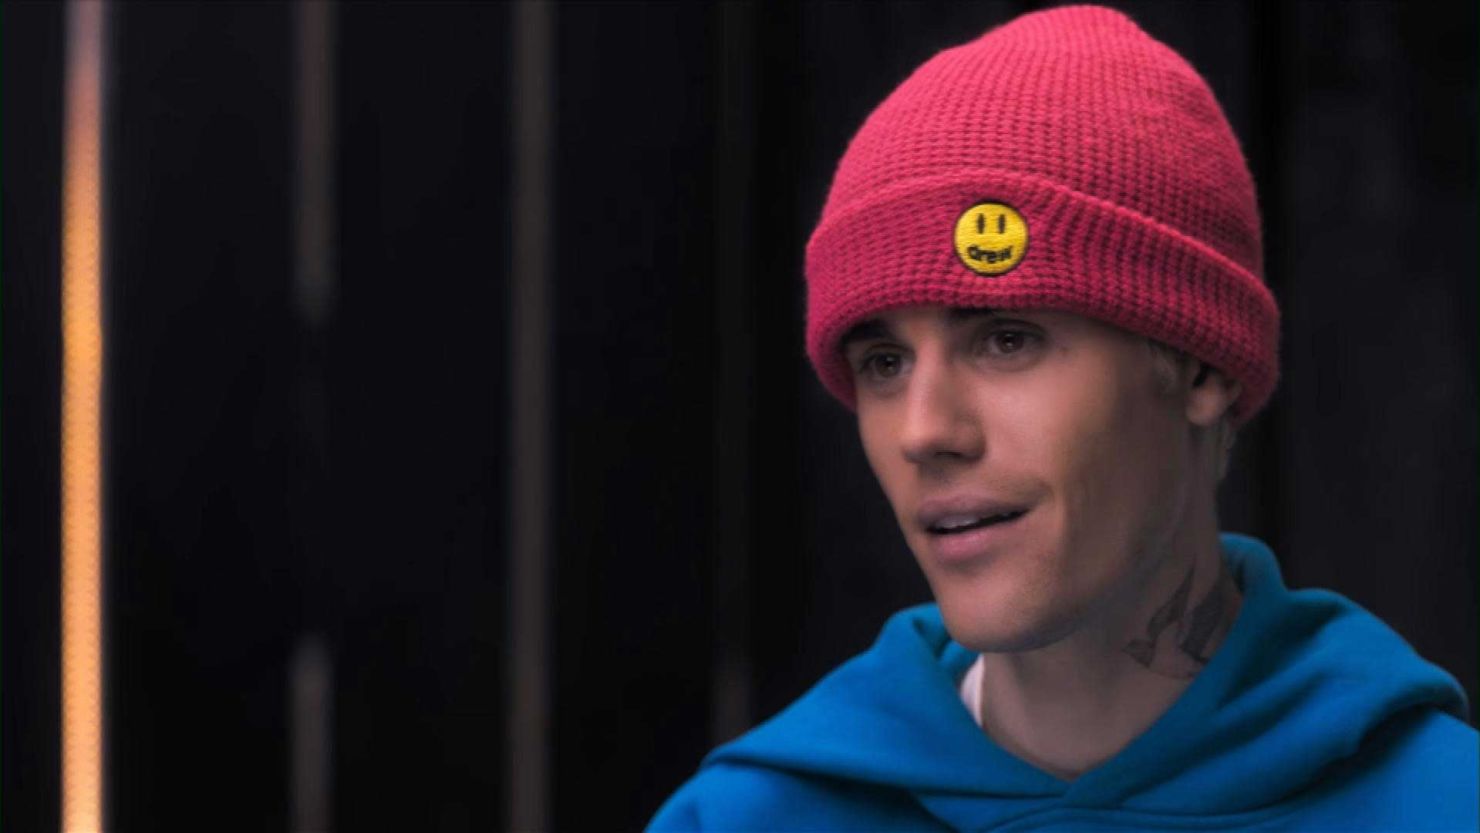 An image from the documentary 'Justin Bieber: Seasons'